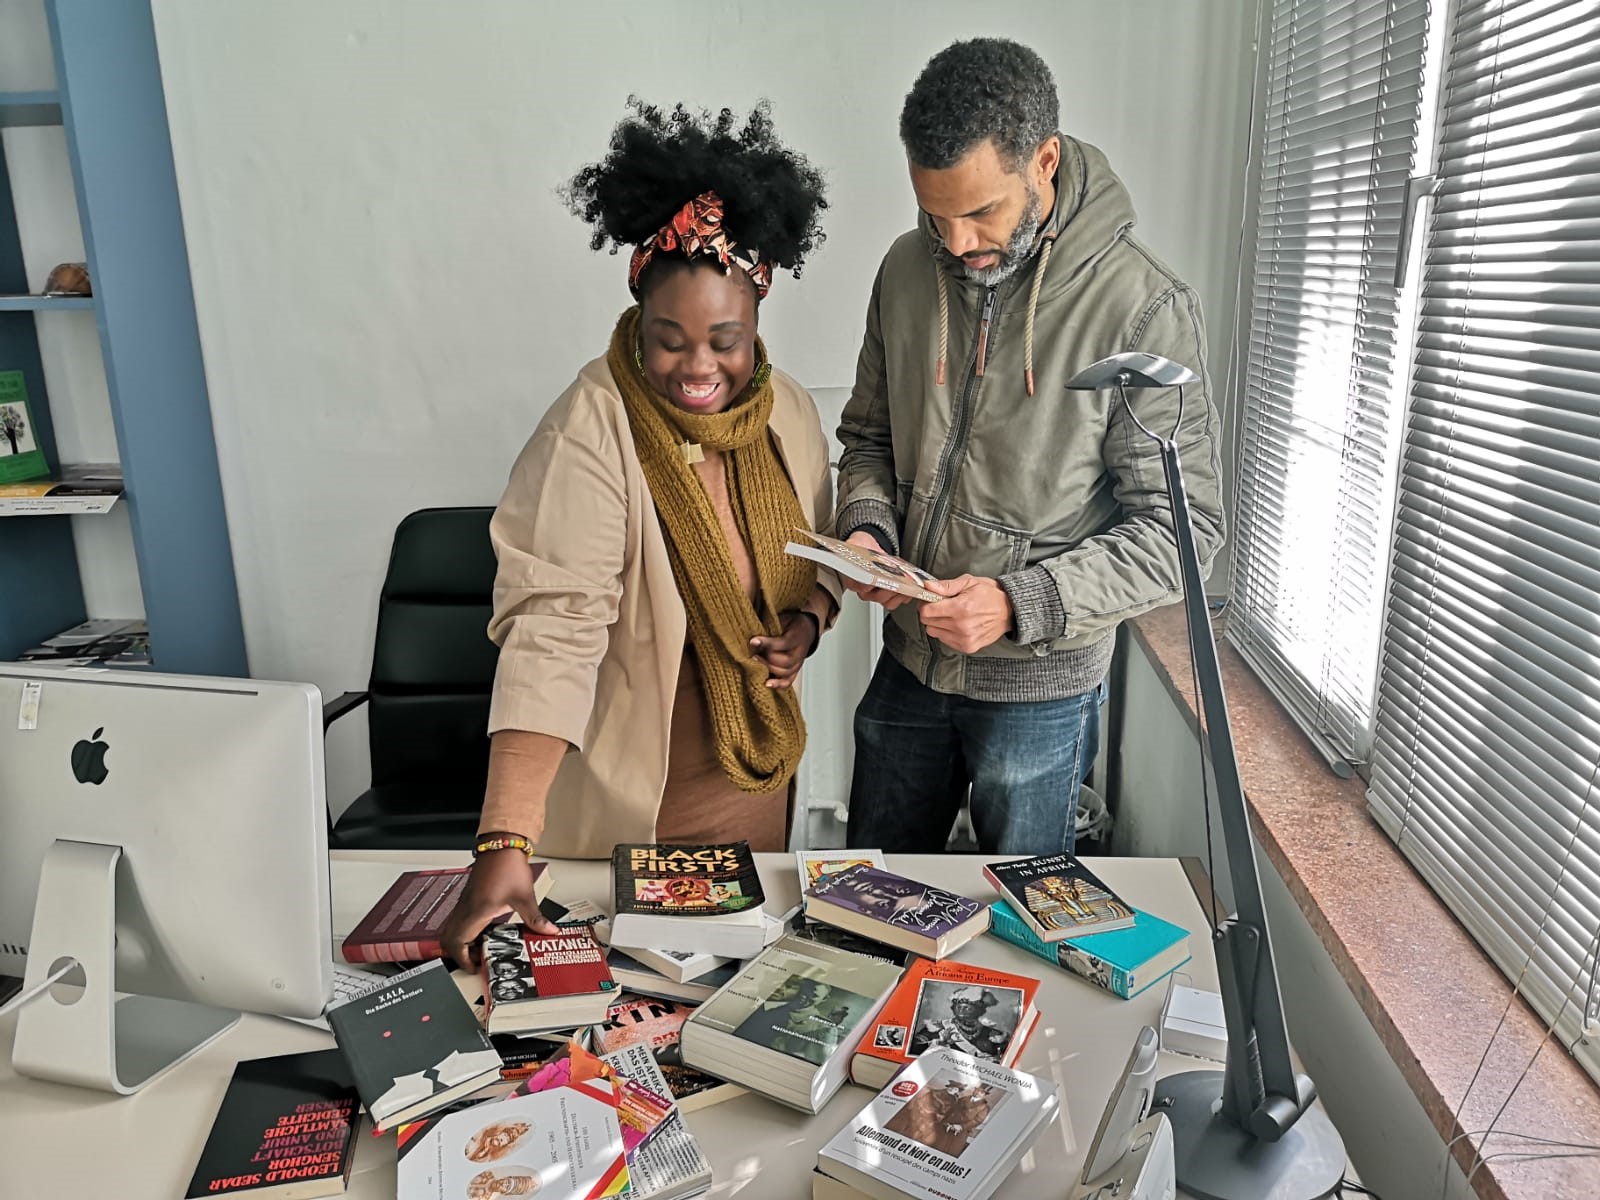 The co-founders of the Theodor Wonja Michael Library, Dr. Njoula Baryoh and Lamin Kargbo, looking through books from Michael's estate. Photo: Sunflower Community Development Group